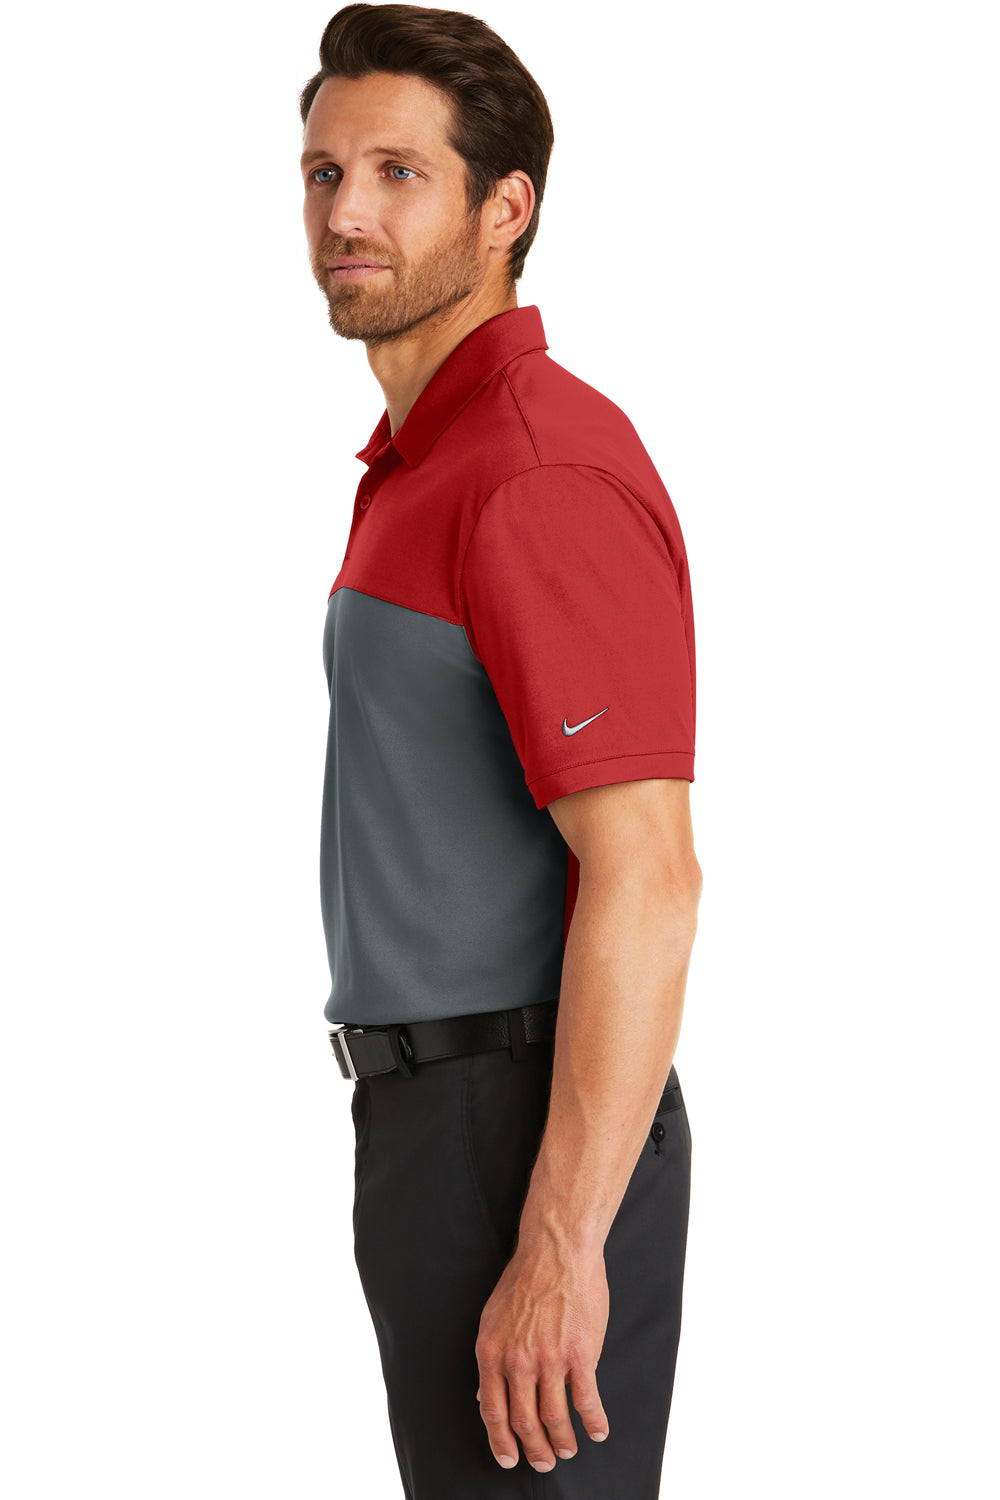 Nike 881655 Mens Dri-Fit Moisture Wicking Short Sleeve Polo Shirt Red/Anthracite Grey Side